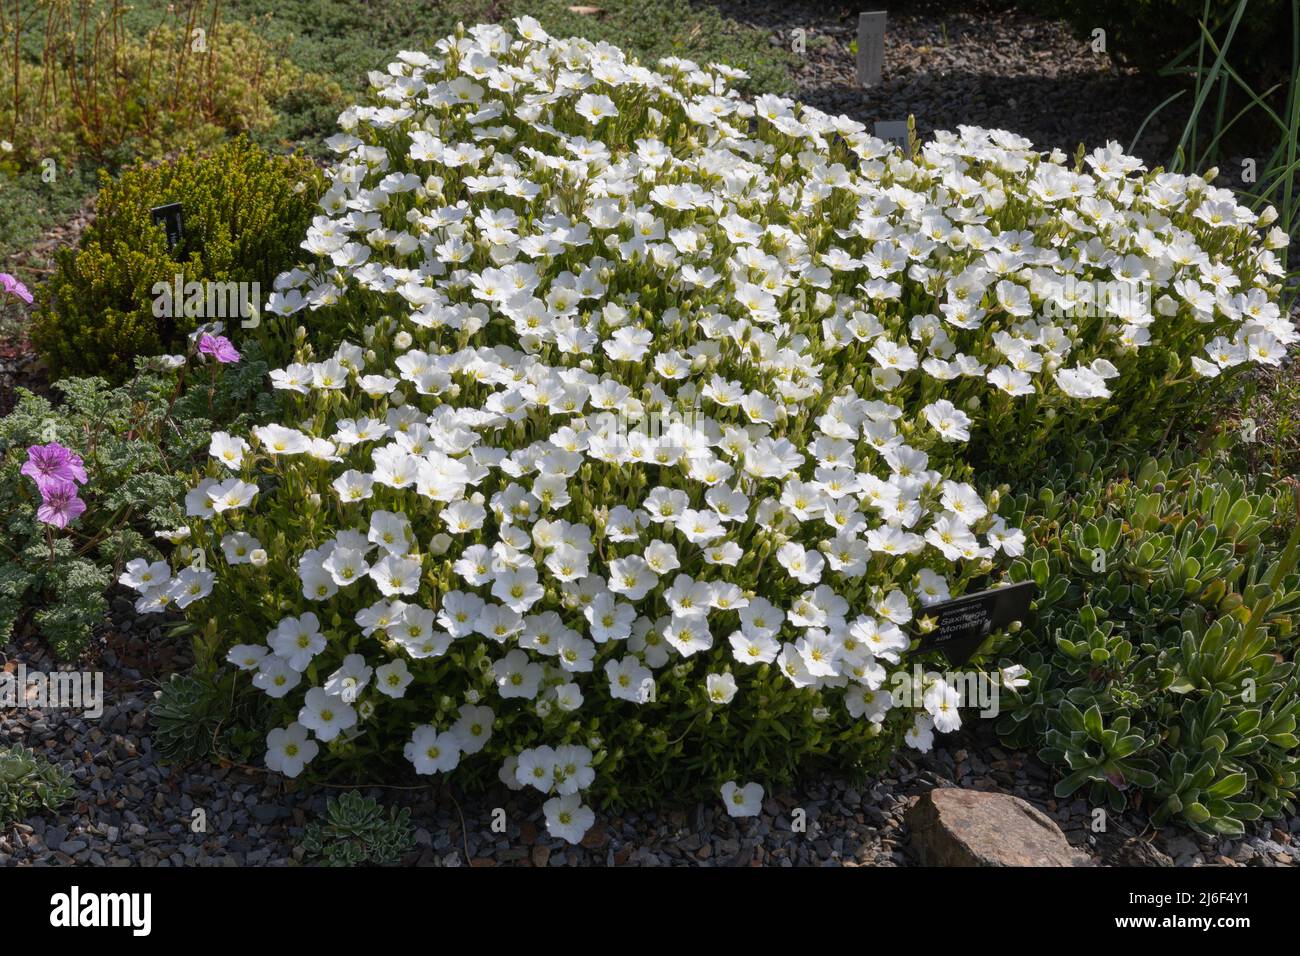 Brilliant white spring blooms of the arenaria montana blizzard forming a carpet on the ground Stock Photo